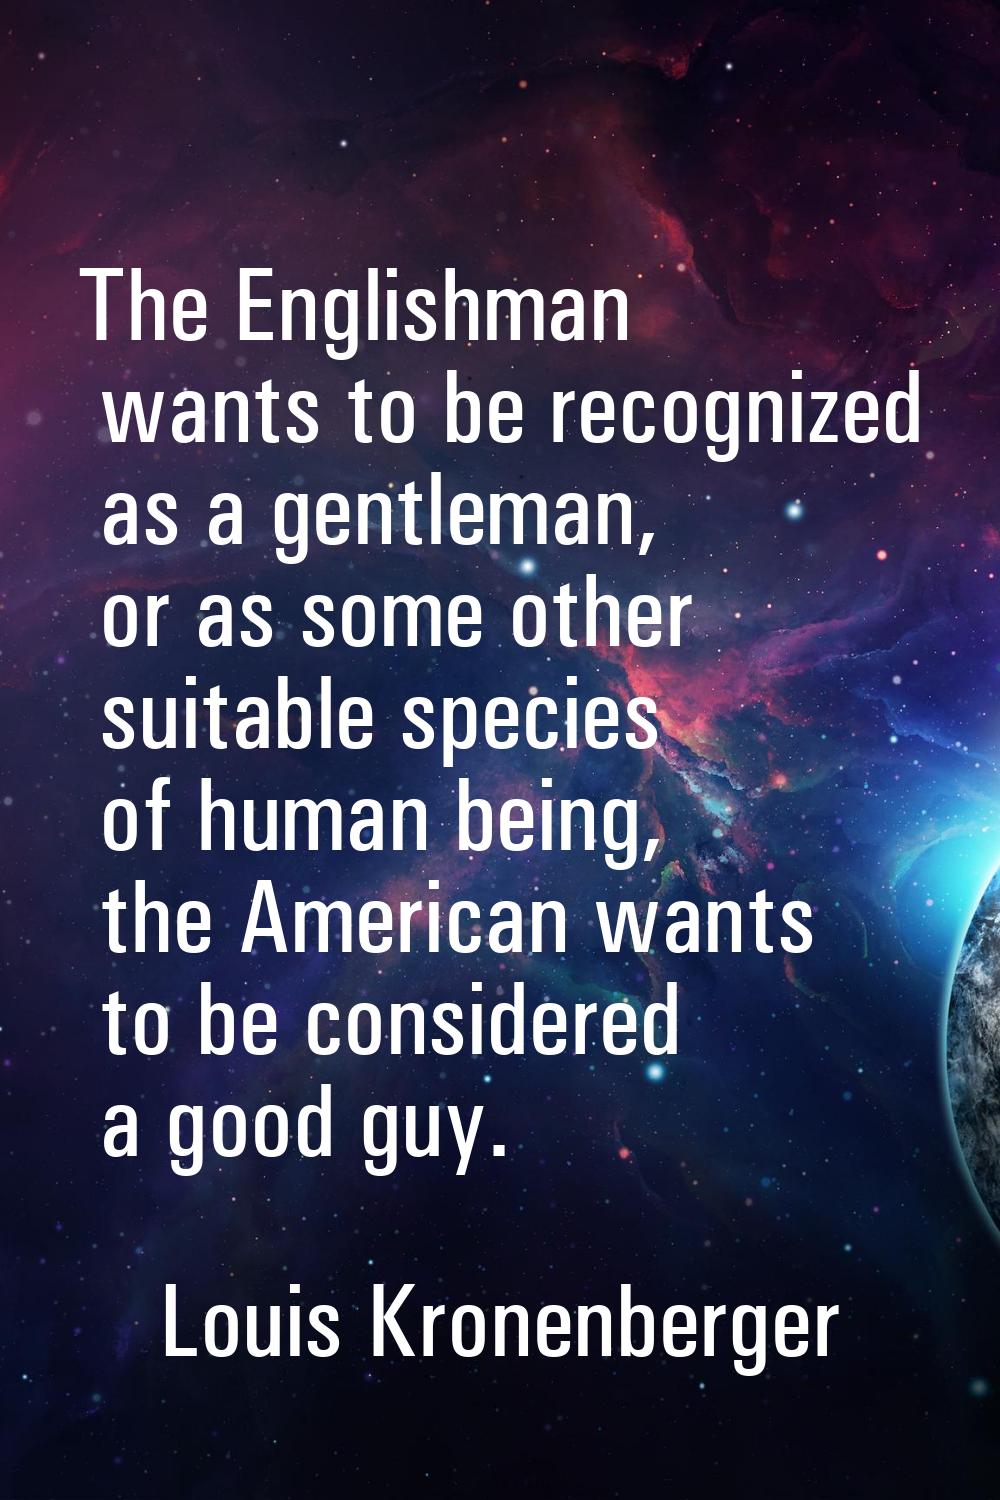 The Englishman wants to be recognized as a gentleman, or as some other suitable species of human be